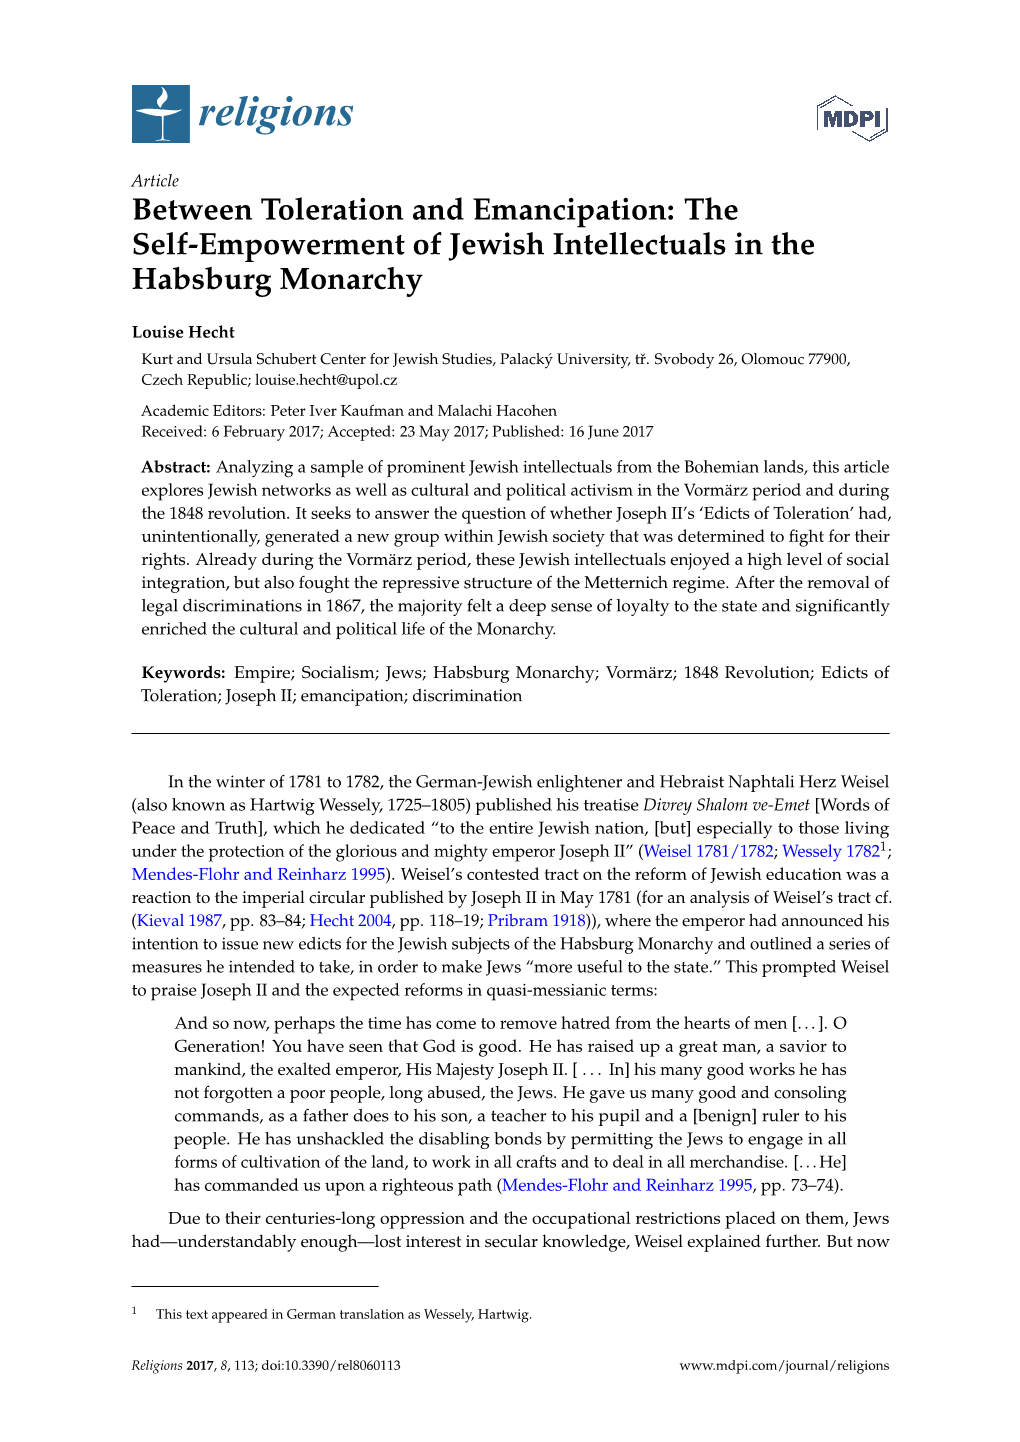 Between Toleration and Emancipation: the Self-Empowerment of Jewish Intellectuals in the Habsburg Monarchy